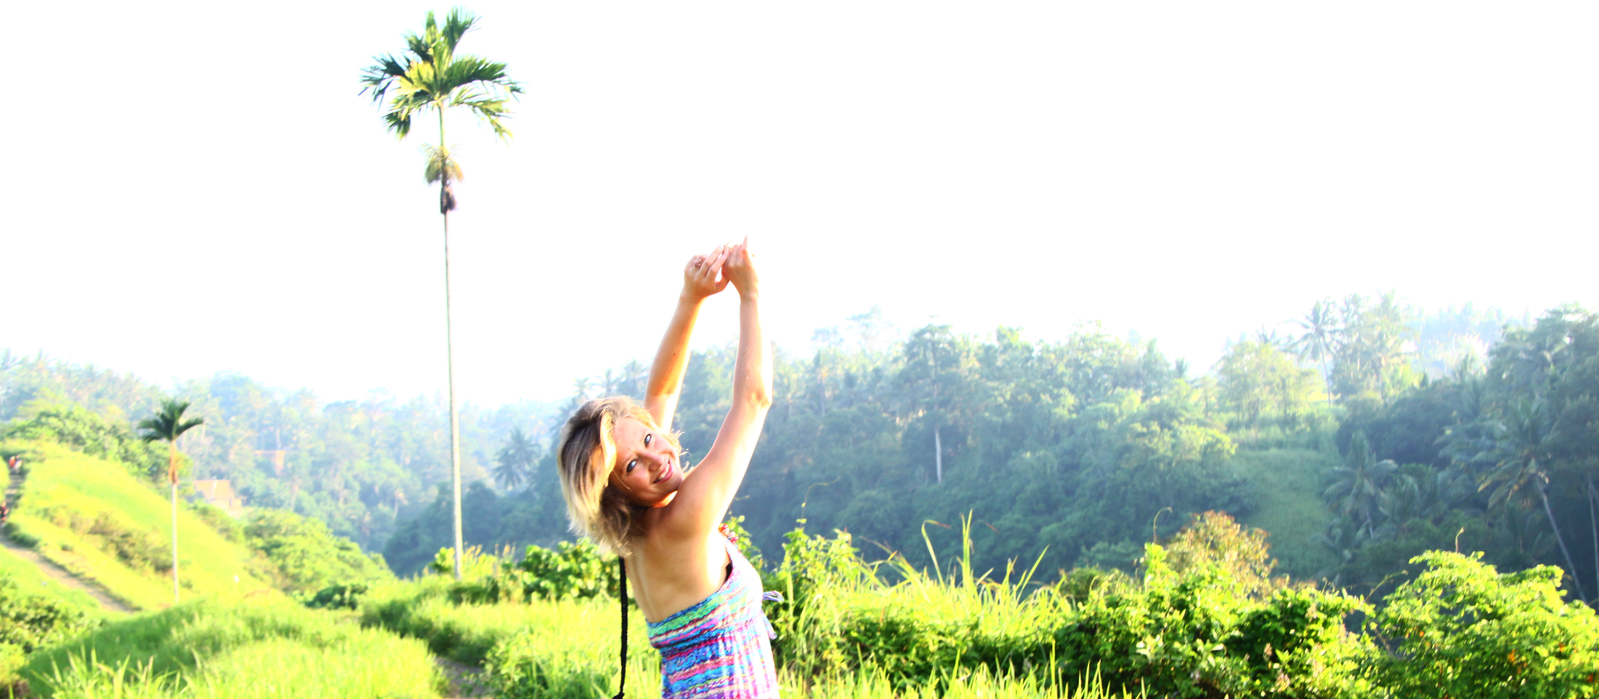 Ilona-on-campuan-ridge-in-bali-indonesia_preview.png